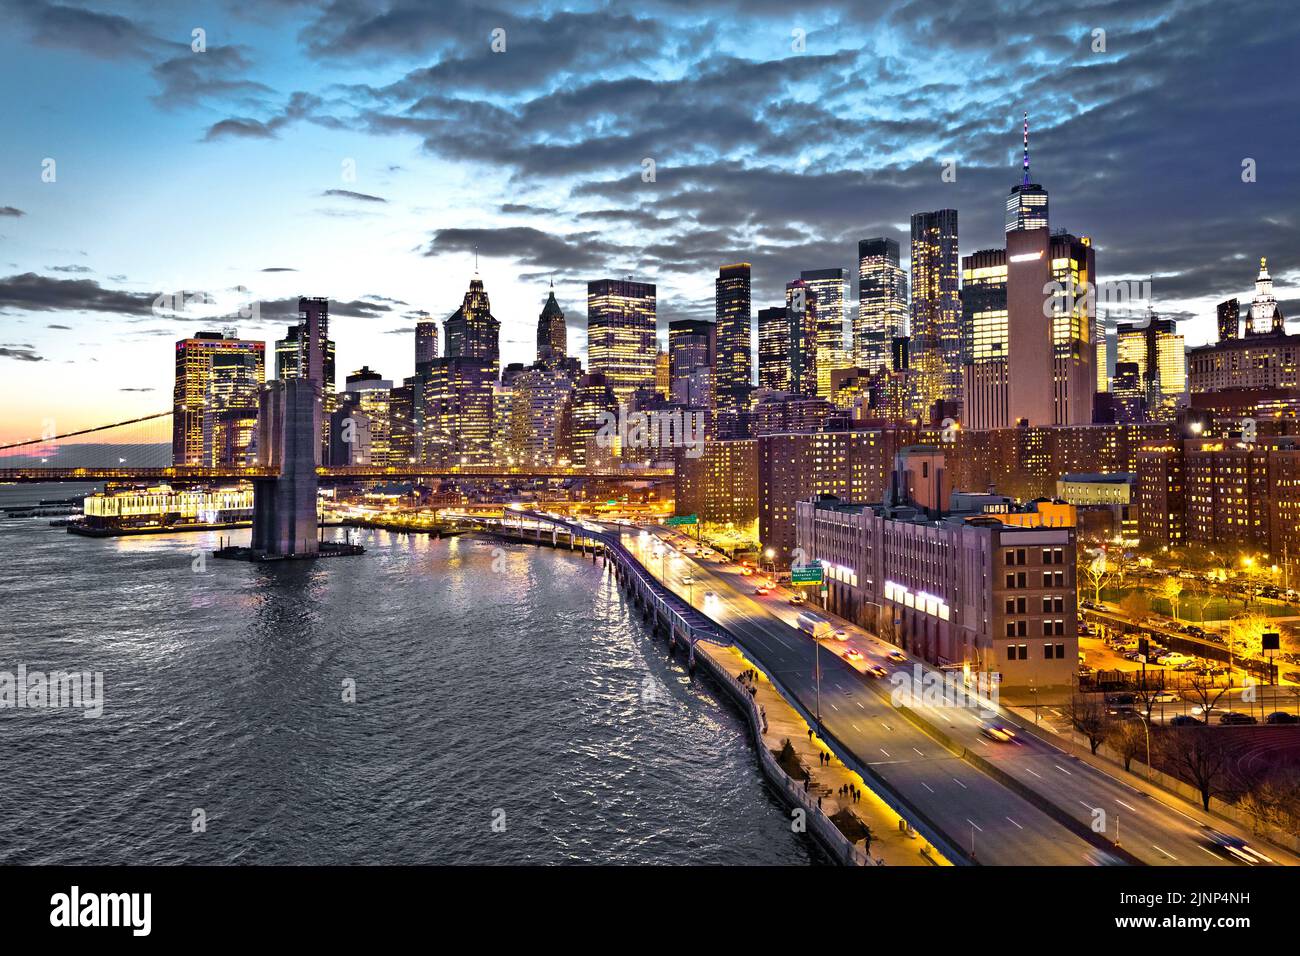 Skyline of New York City downtown and Brooklyn bridge dusk view, United States of America Stock Photo